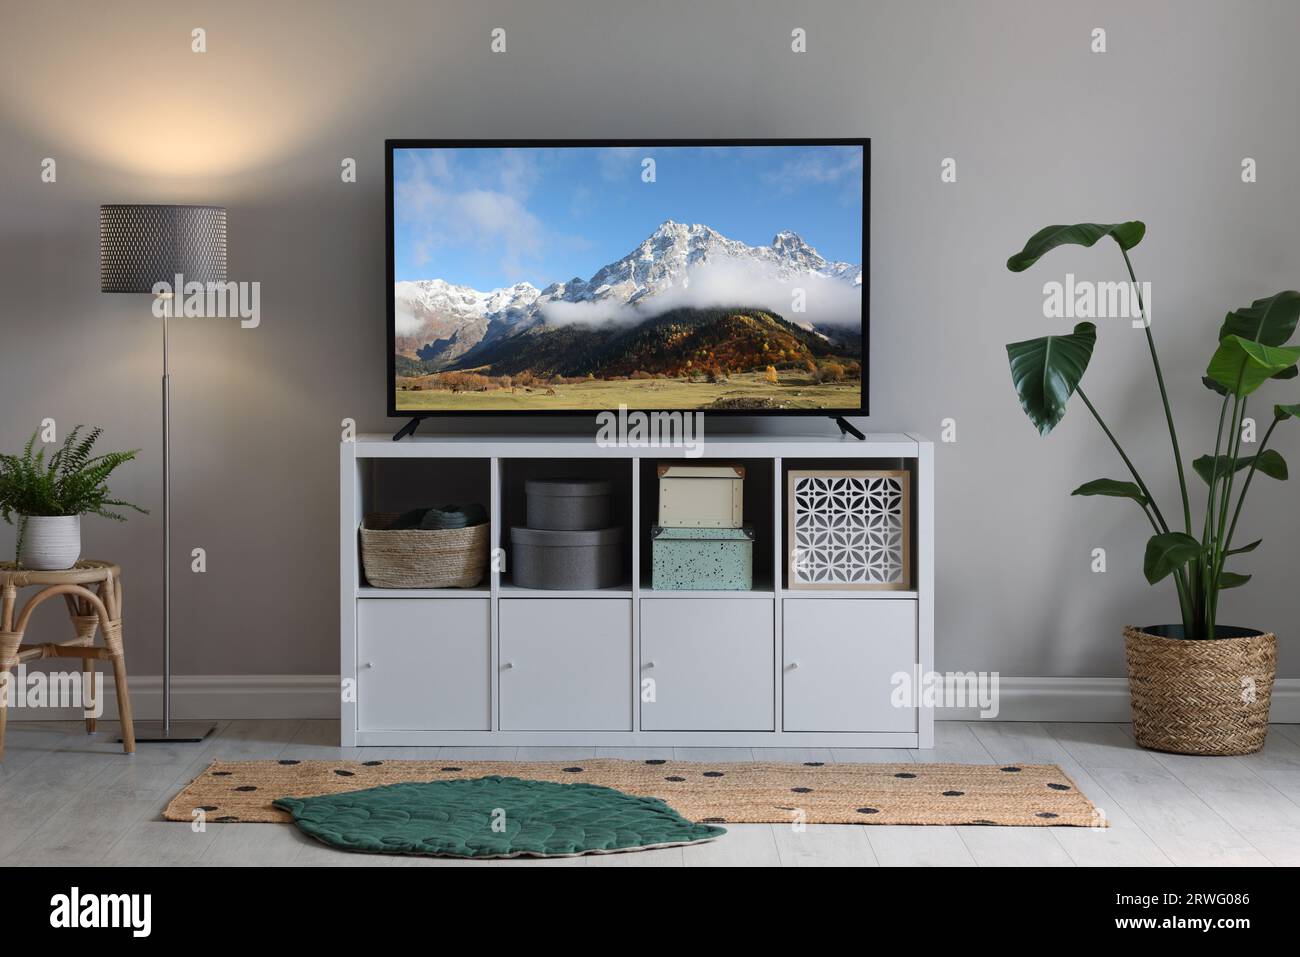 Mountain landscape on TV screen in room Stock Photo